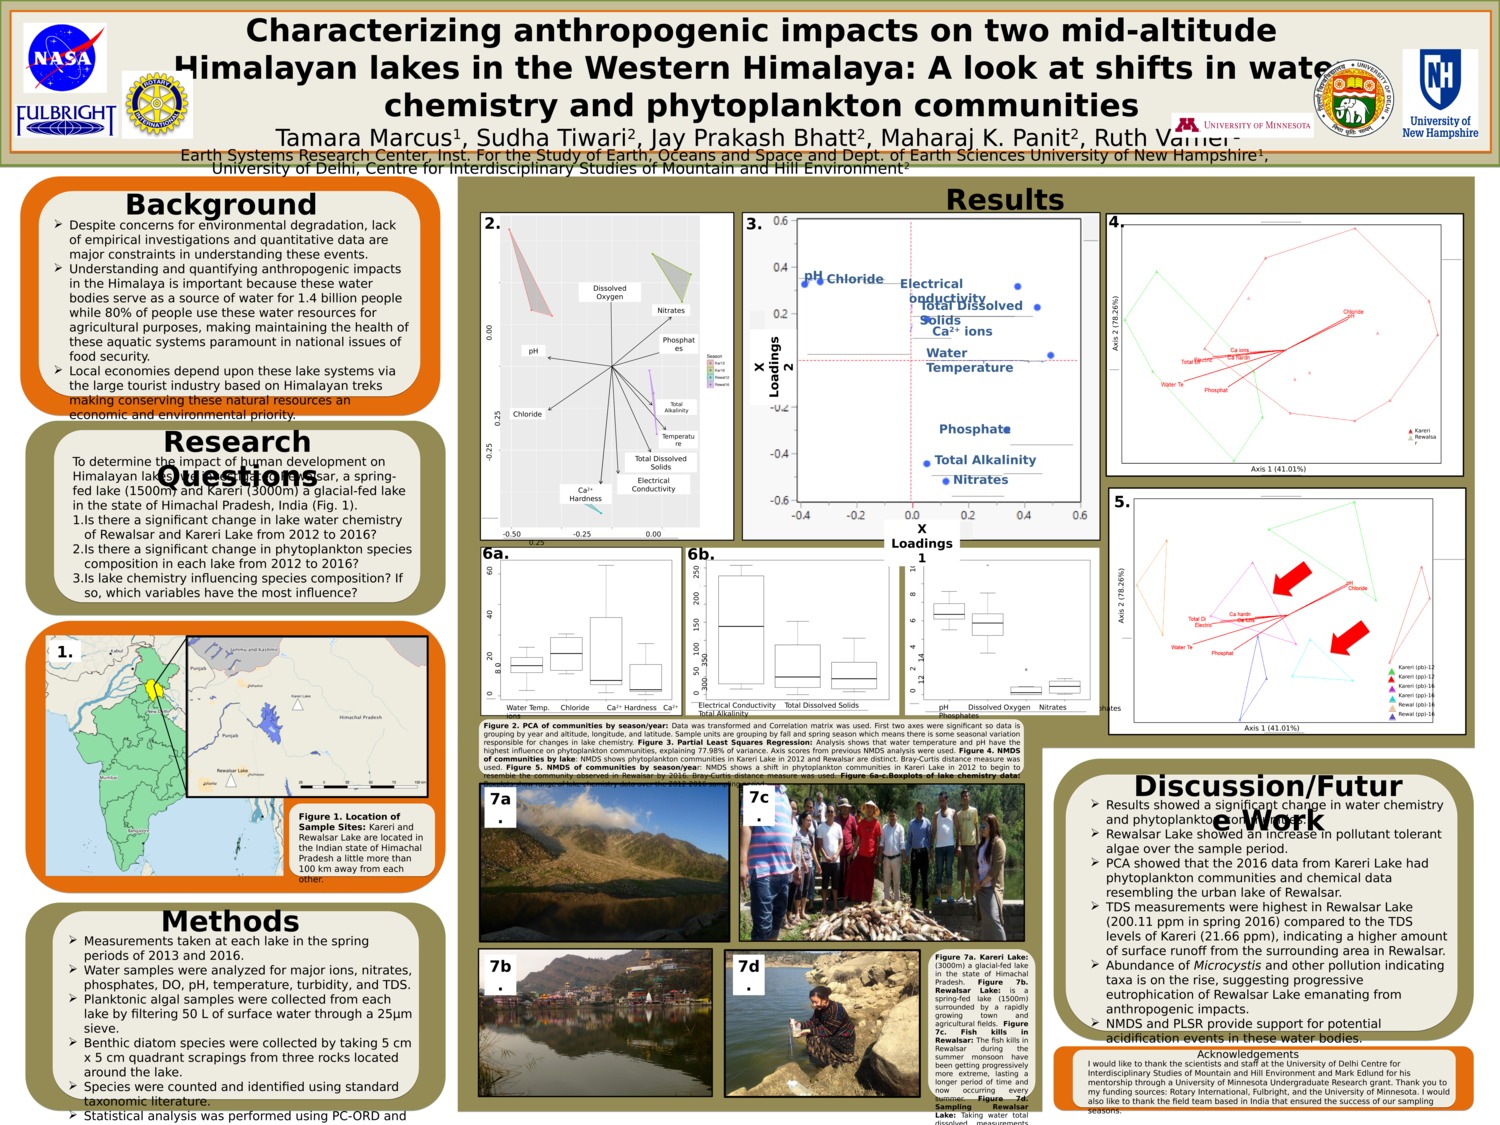 Characterizing Anthropogenic Impacts On Two Mid-Altitude Himalayan Lakes In The Western Himalaya: A Look At Shifts In Water Chemistry And Phytoplankton Communities by tsm1004